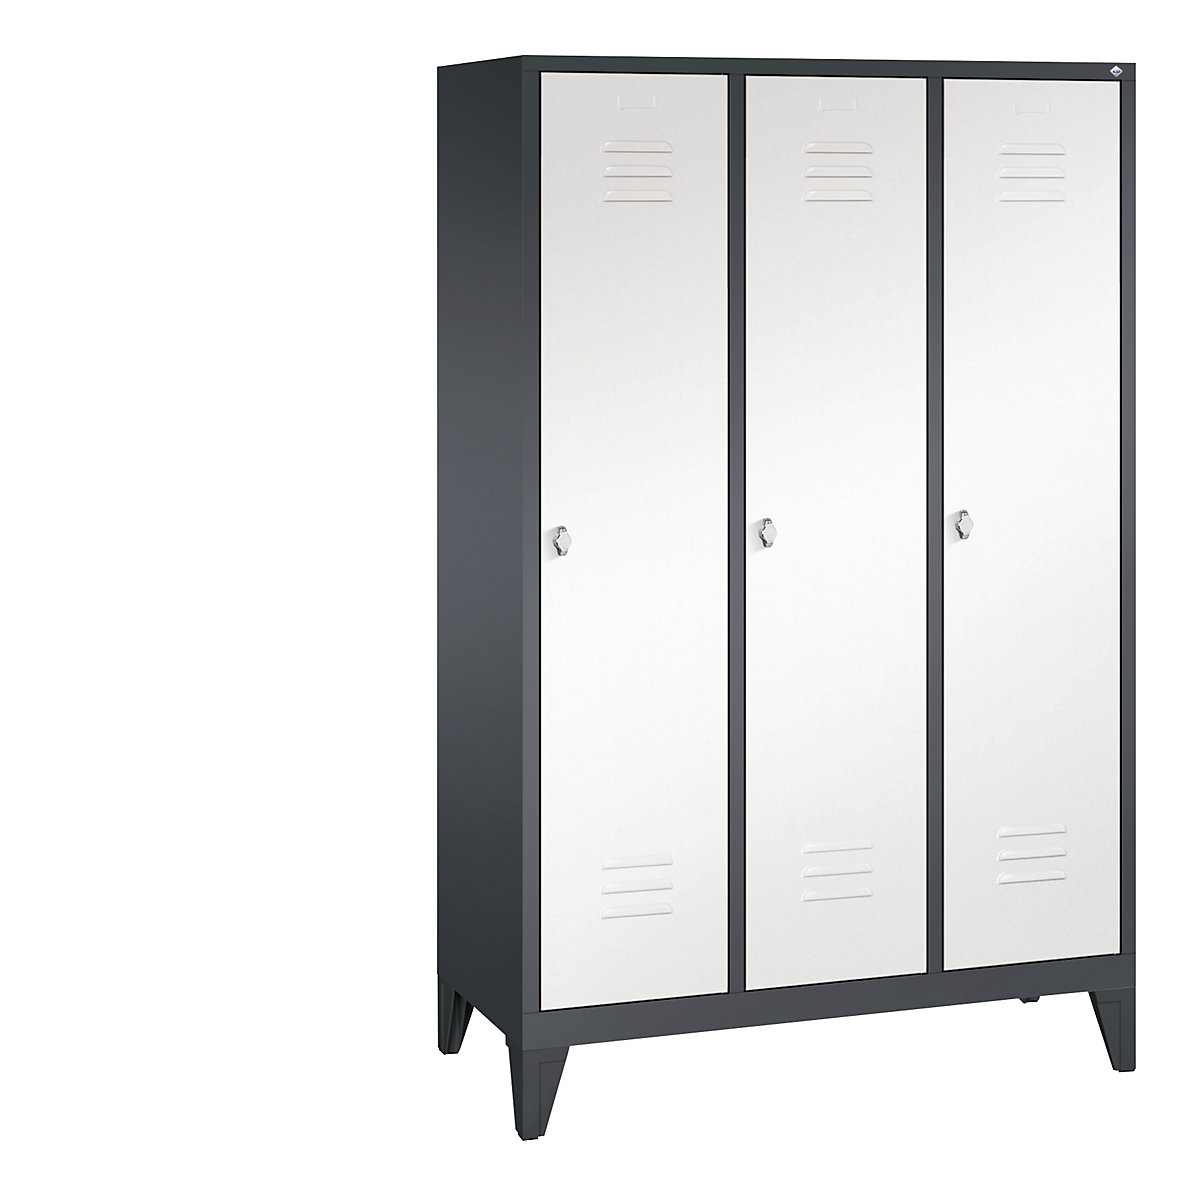 CLASSIC cloakroom locker with feet – C+P, 3 compartments, compartment width 400 mm, black grey / traffic white-3